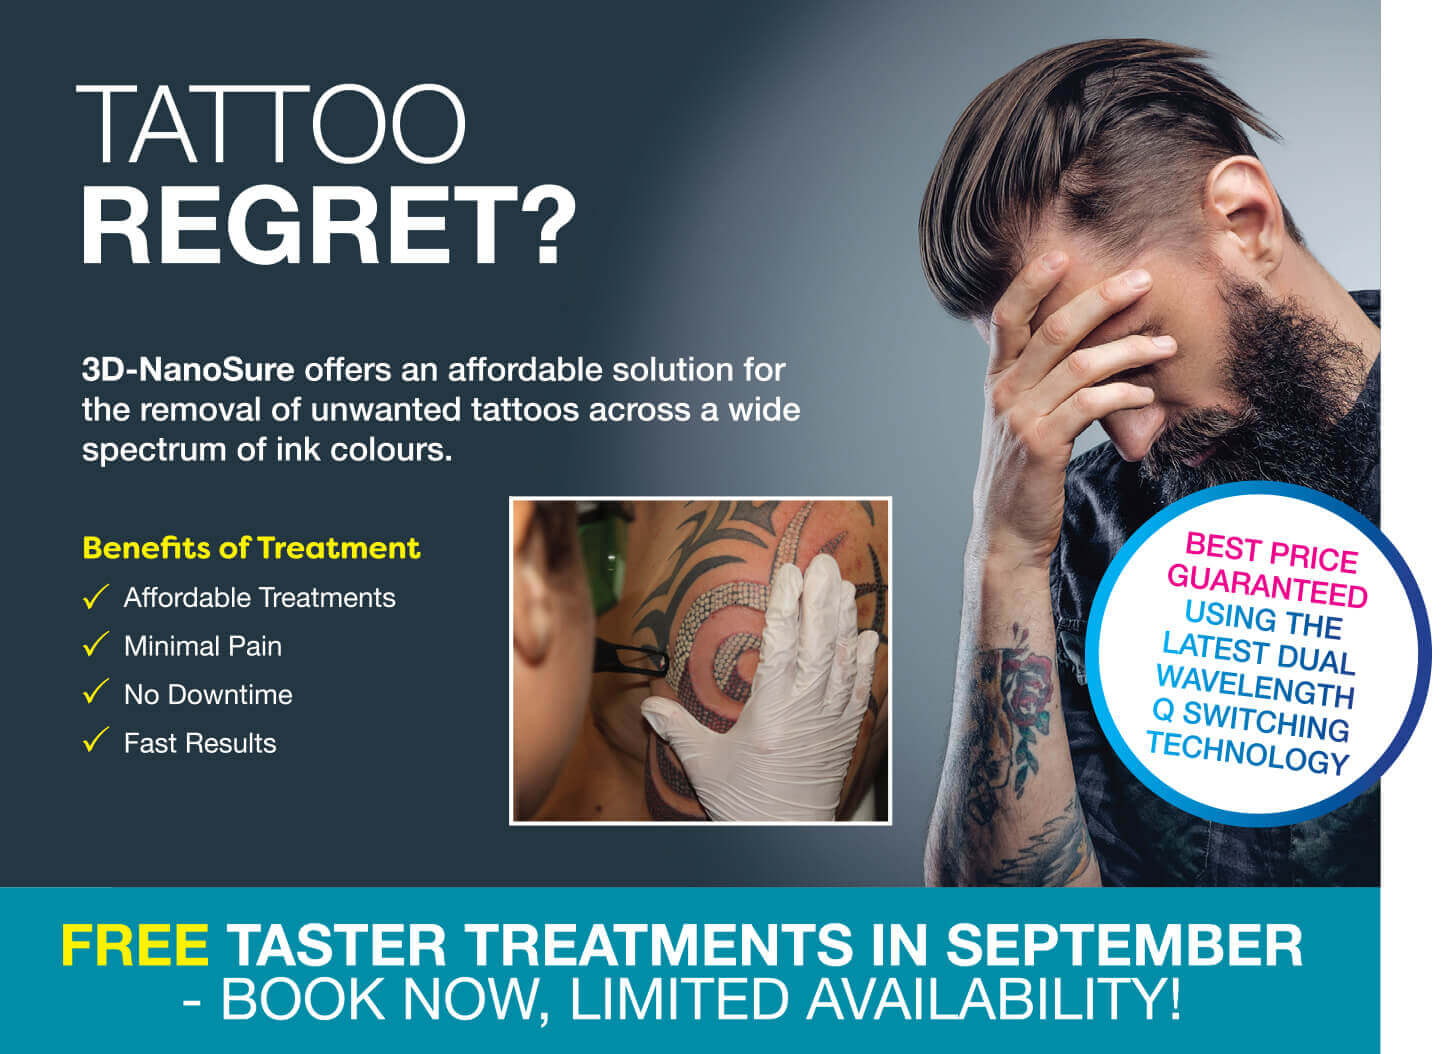 Tattoo Regrets Lead Many To Take Removal Into Their Own Hands - CBS New York